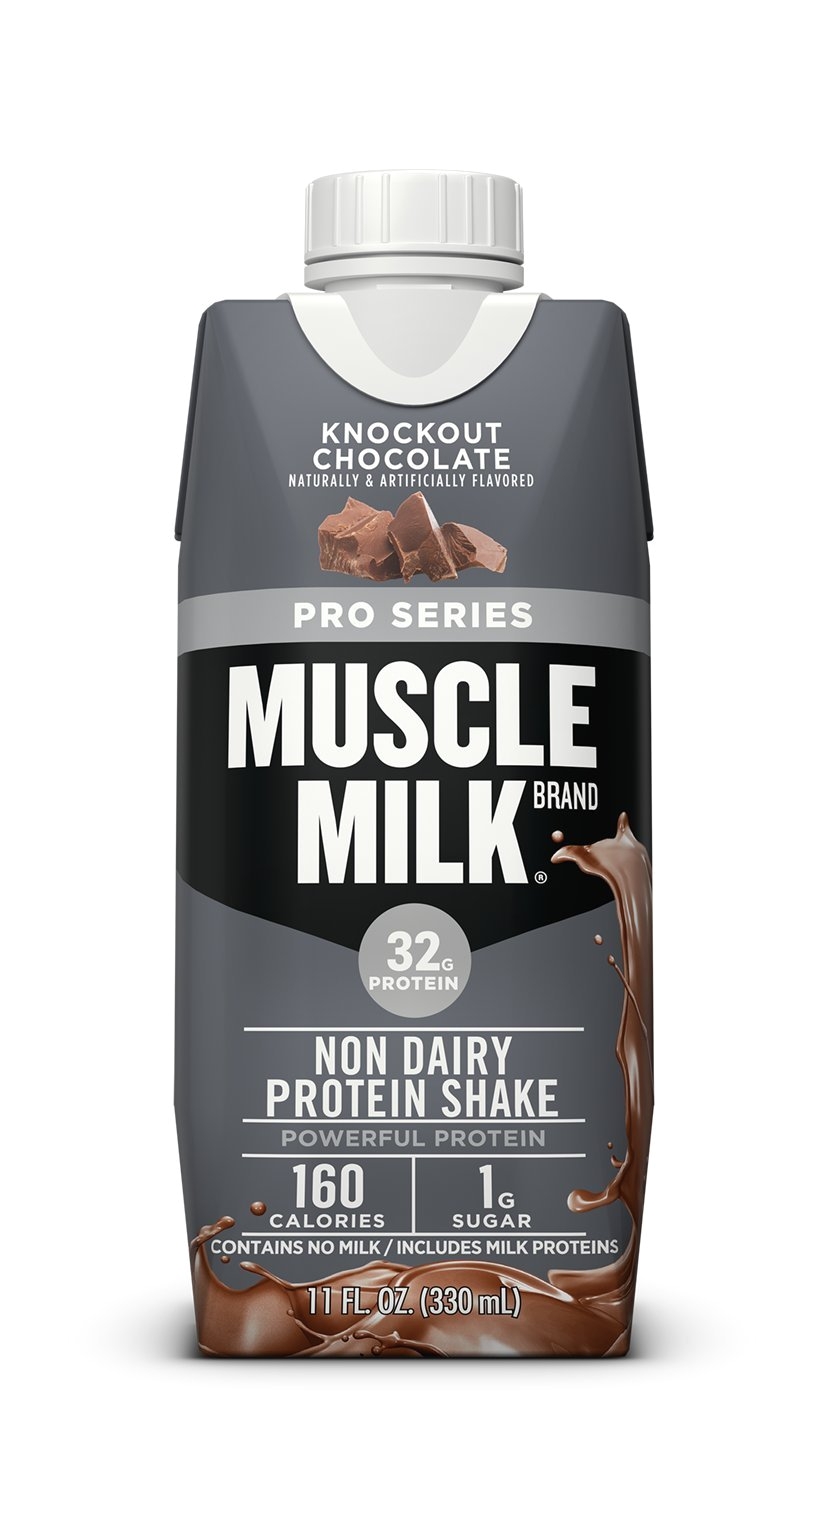 muscle milk pro series protein shake knockout chocolate 32g protein 11 fl oz